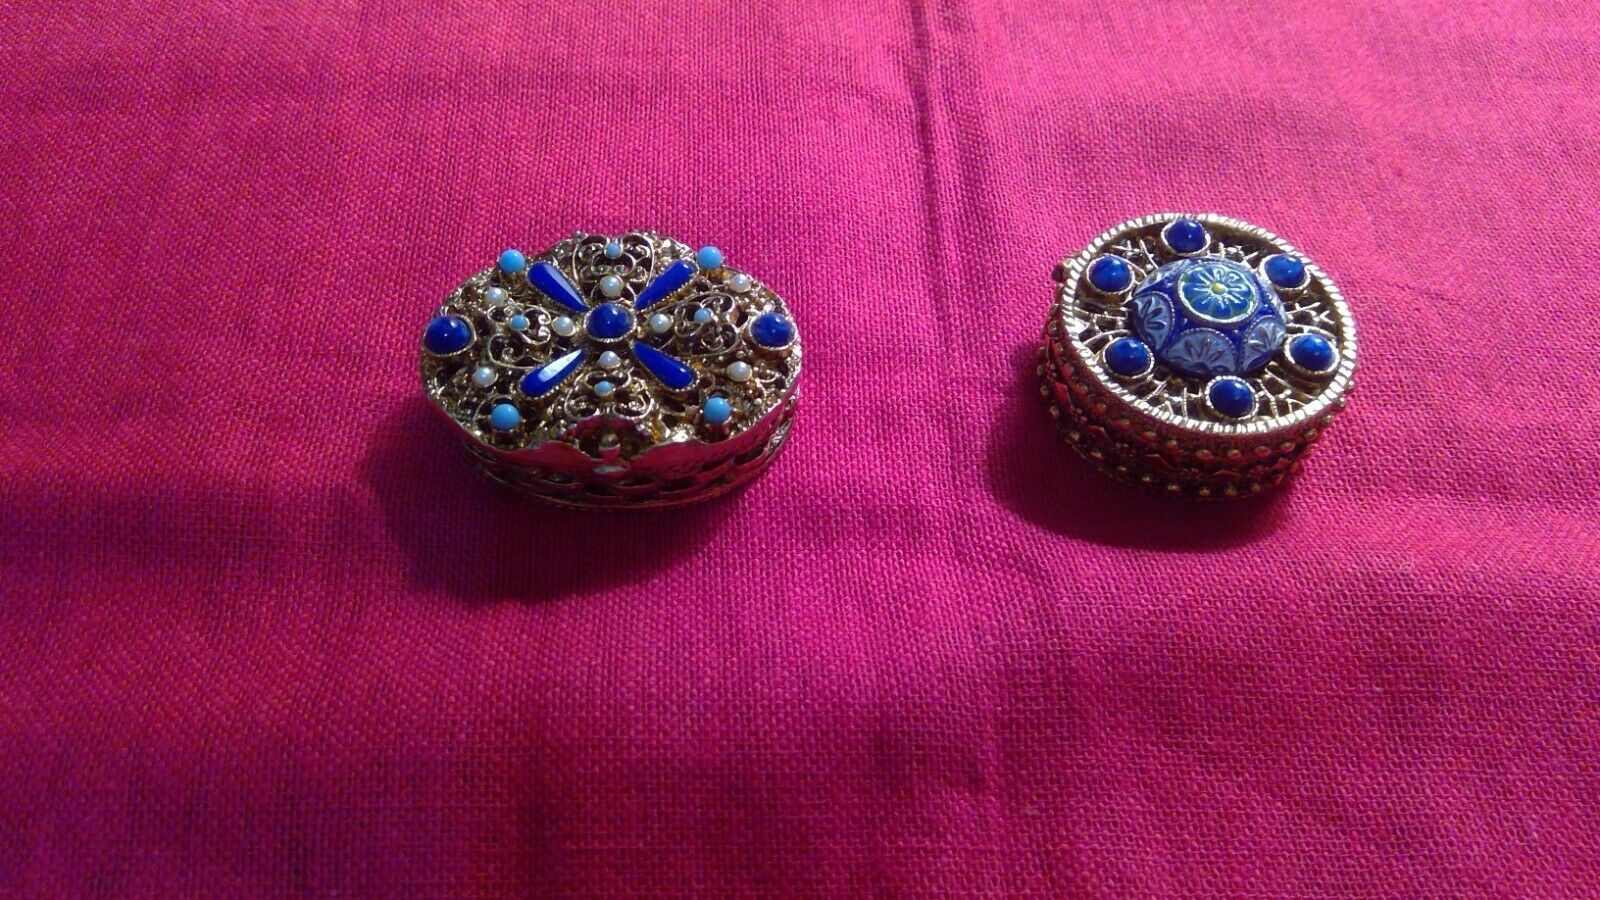 Vintage Filigree Gold Pill Boxes - Set Of 2 - Oval W/blue Stones / Round W/blue